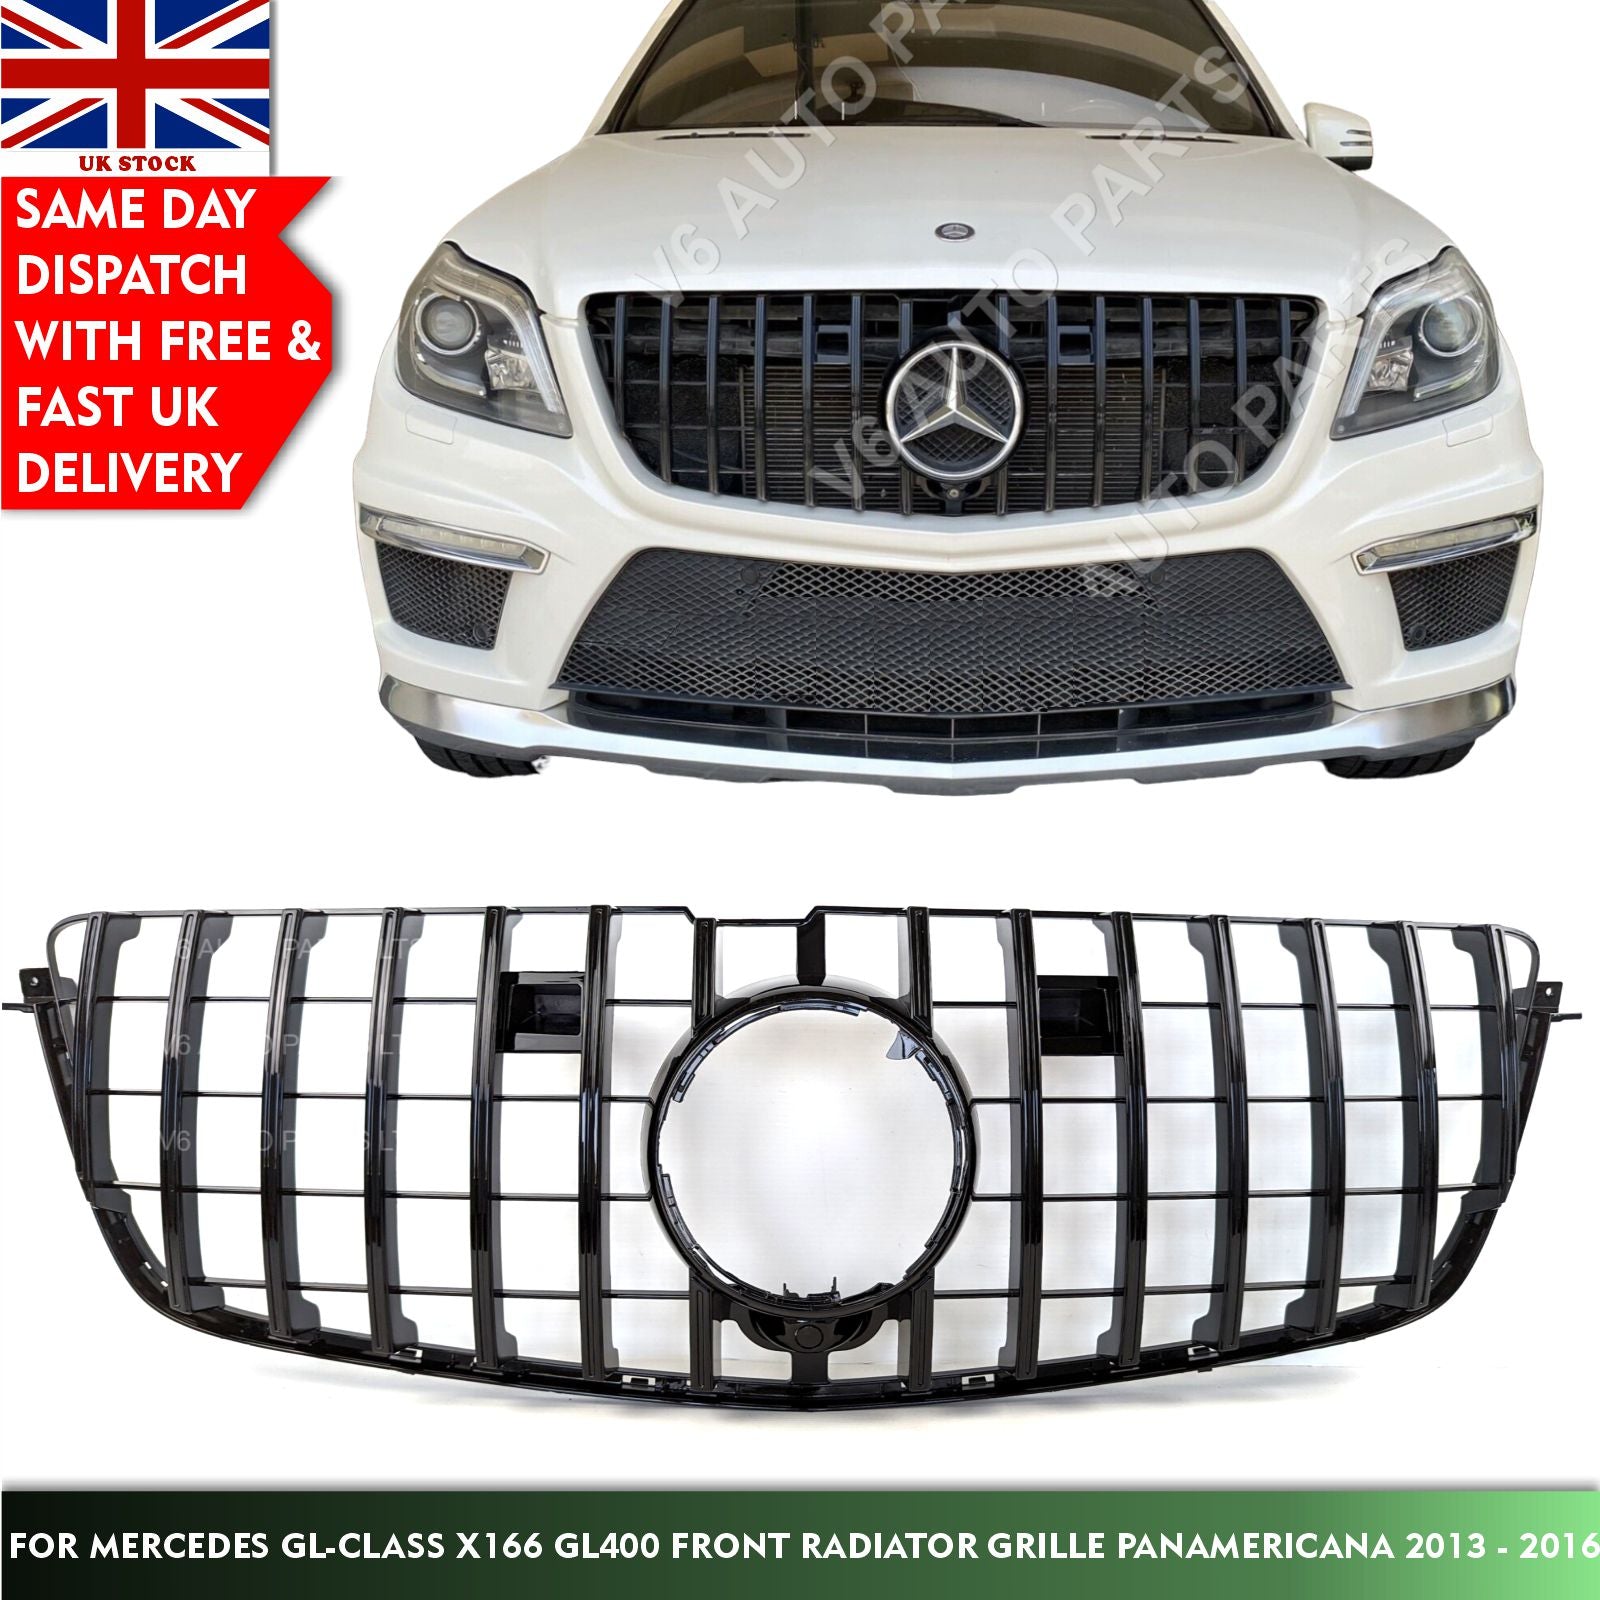 For Mercedes GL-Class X166 GL400 Front Radiator Grille Panamericana 2013 - 2016